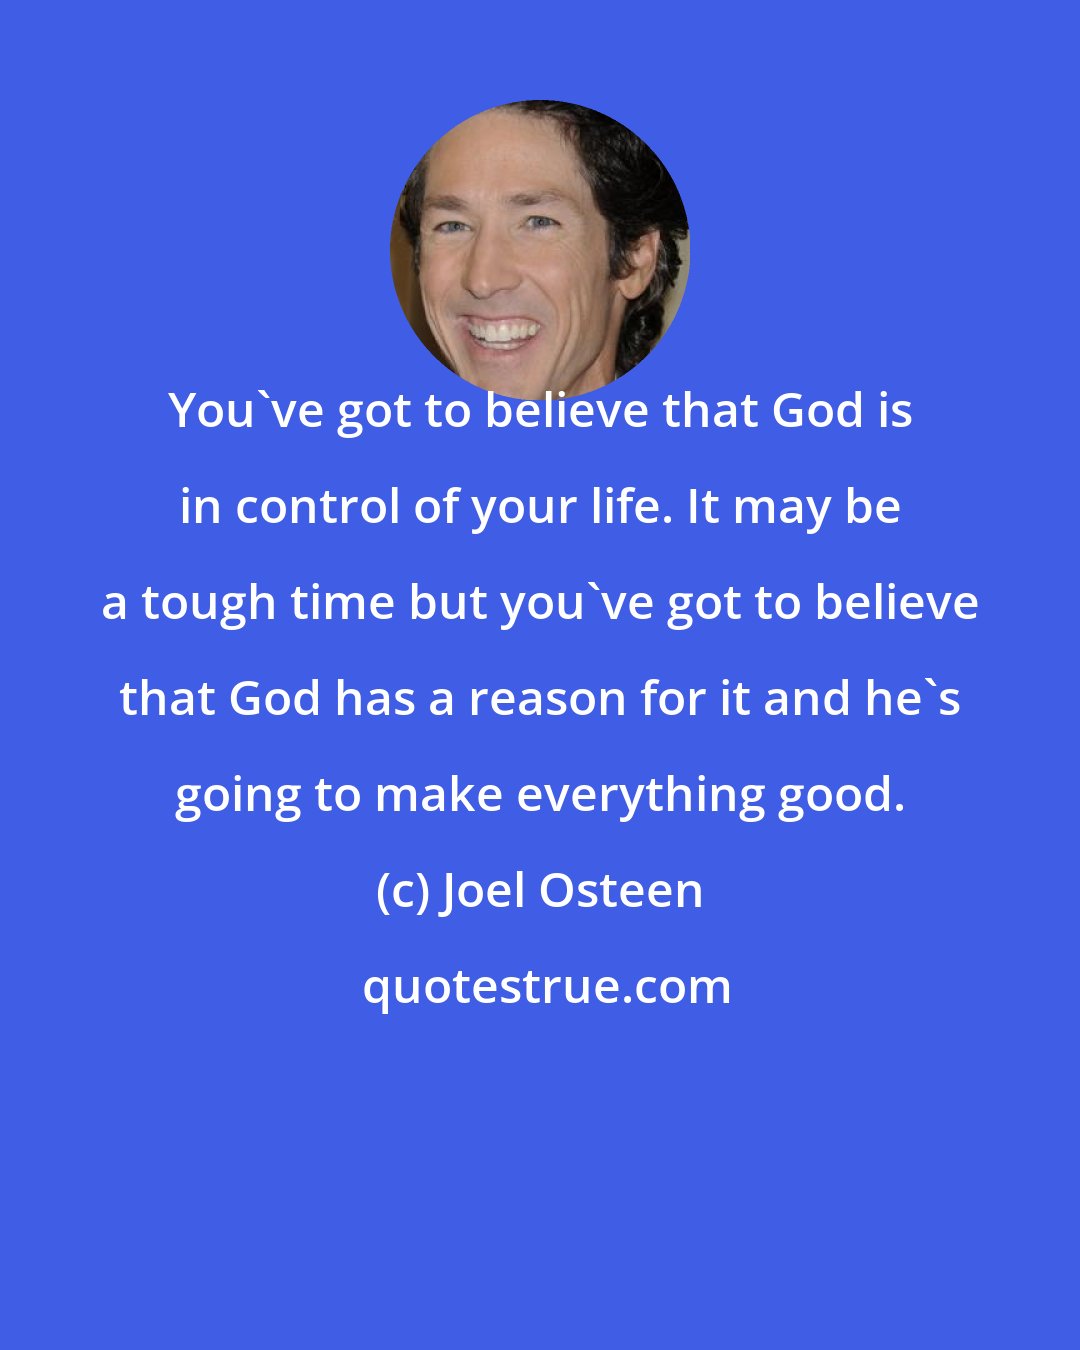 Joel Osteen: You've got to believe that God is in control of your life. It may be a tough time but you've got to believe that God has a reason for it and he's going to make everything good.